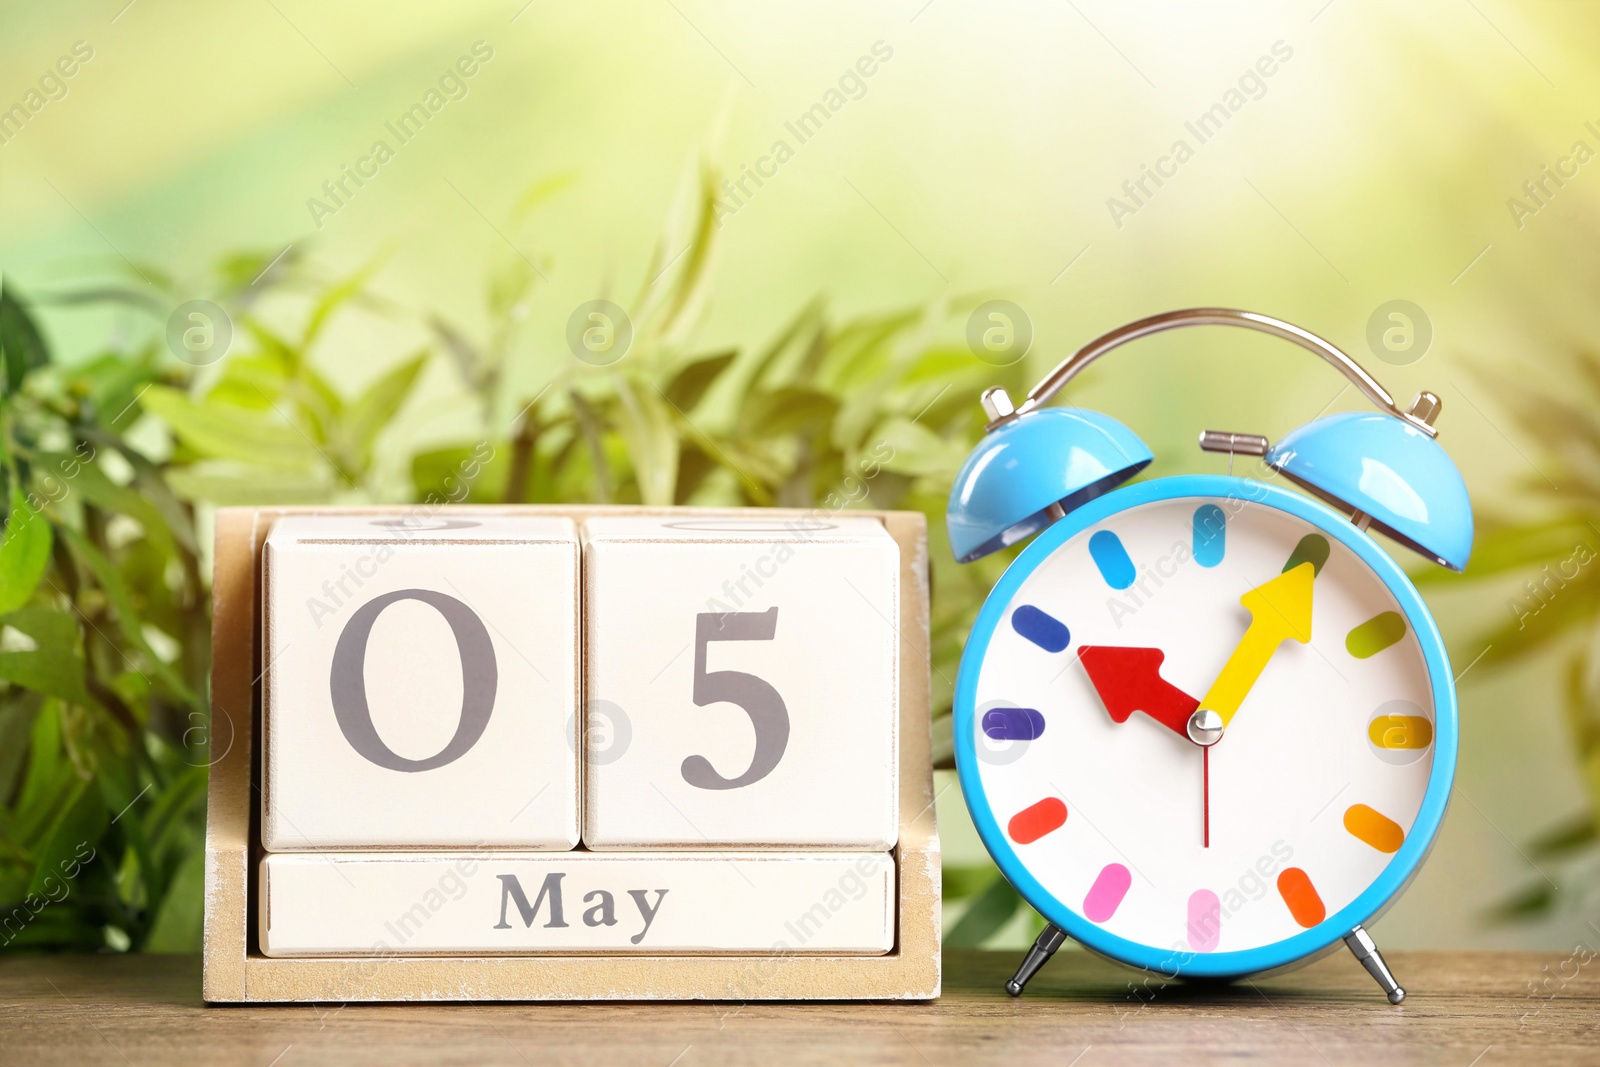 Image of Wooden block calendar and alarm clock on table against blurred green background